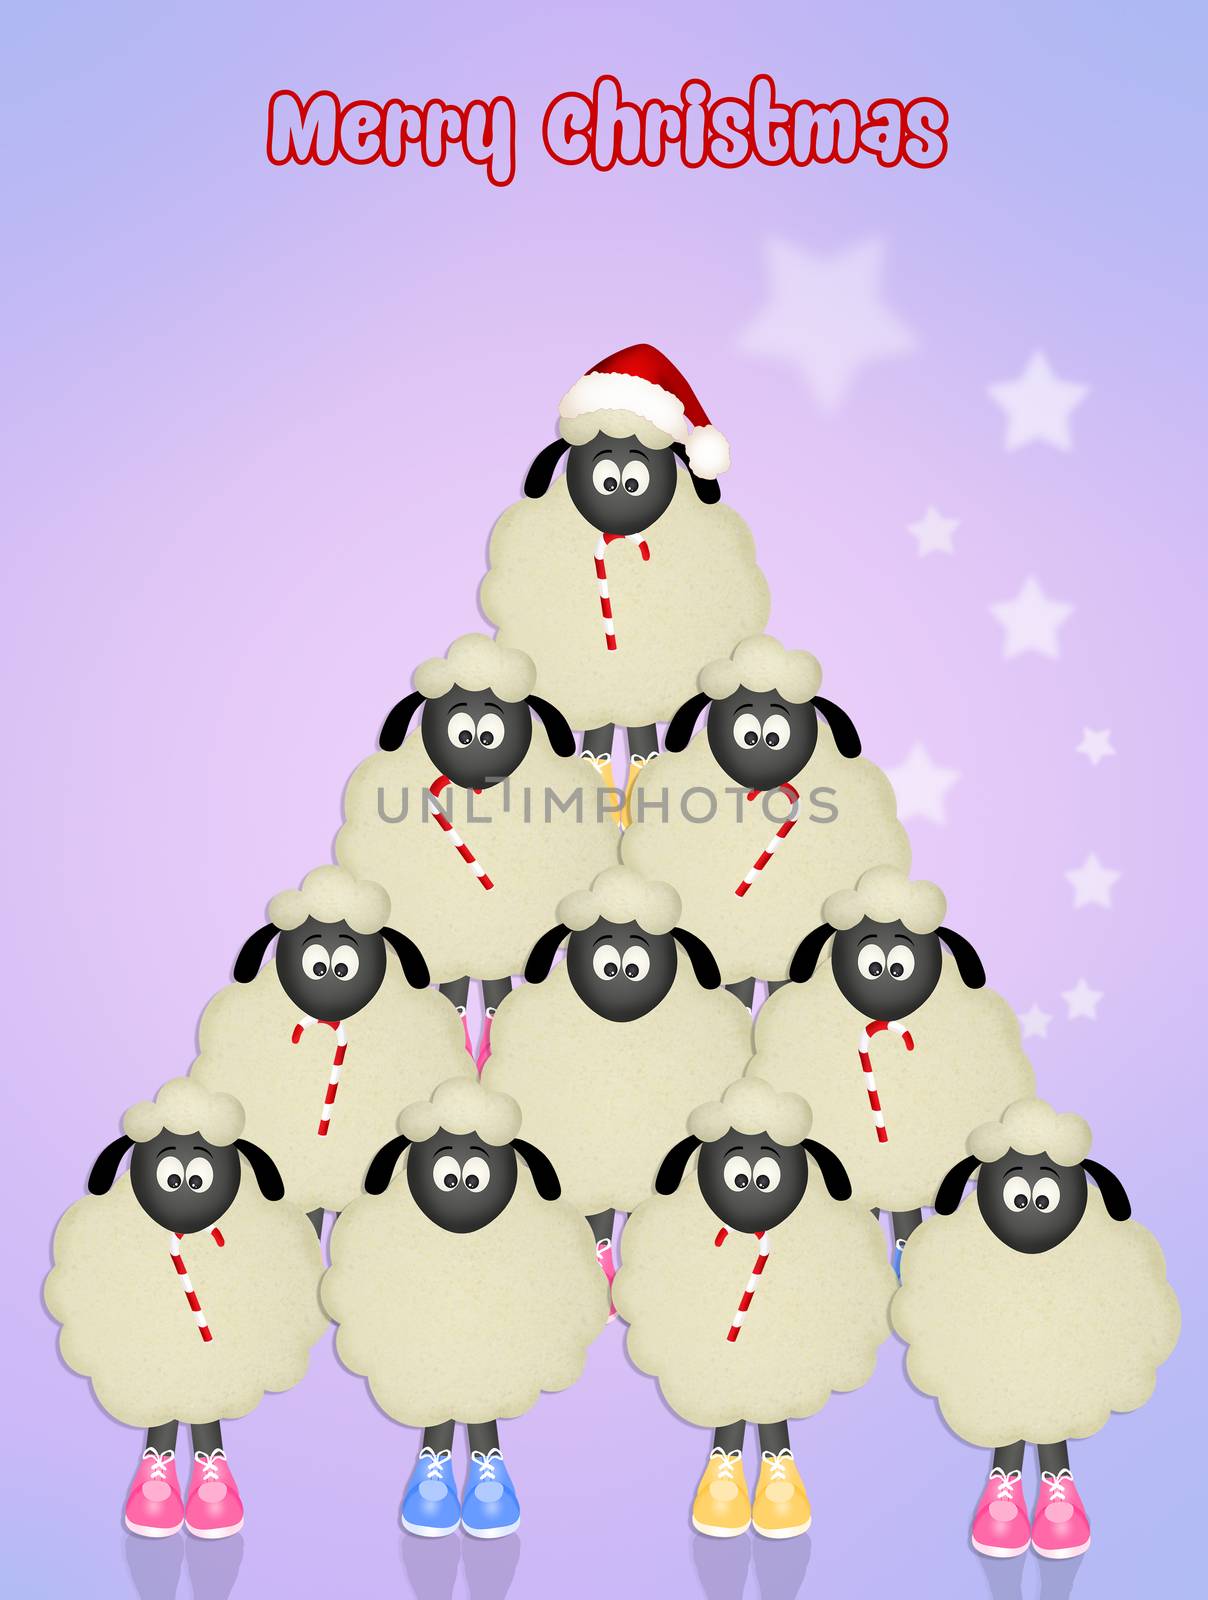 illustration of postcard for Christmas with sheeps